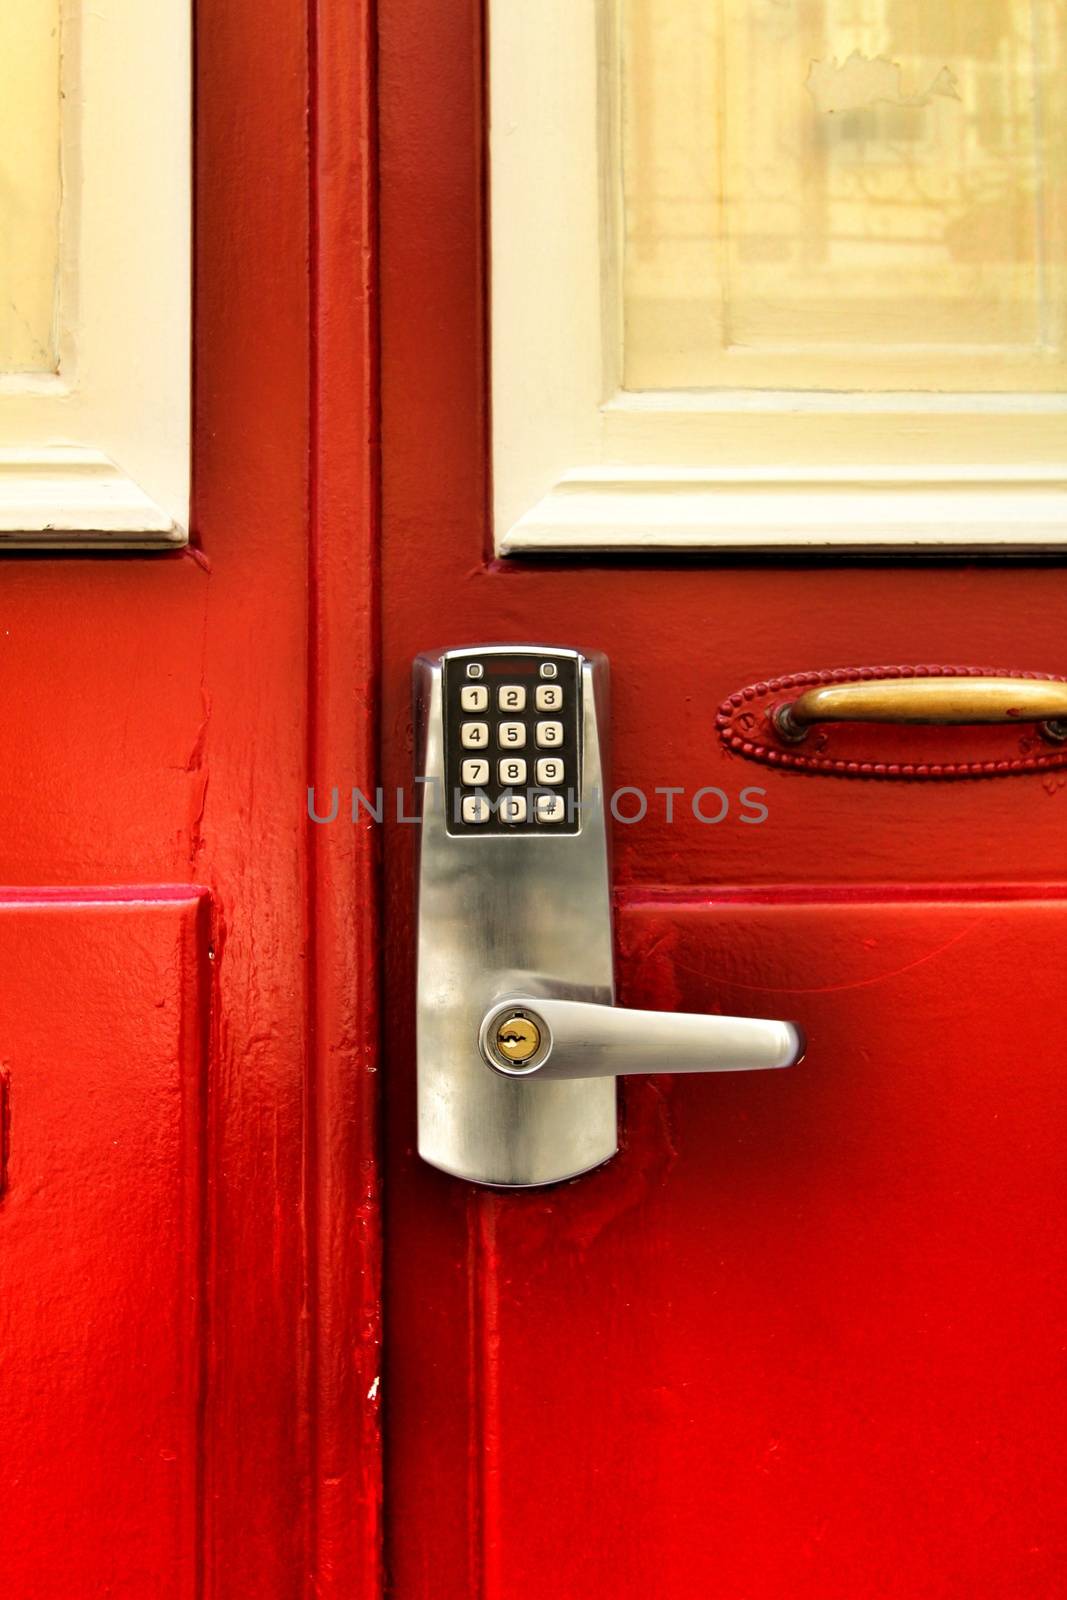 Tourist accommodation door with numeric key access by soniabonet